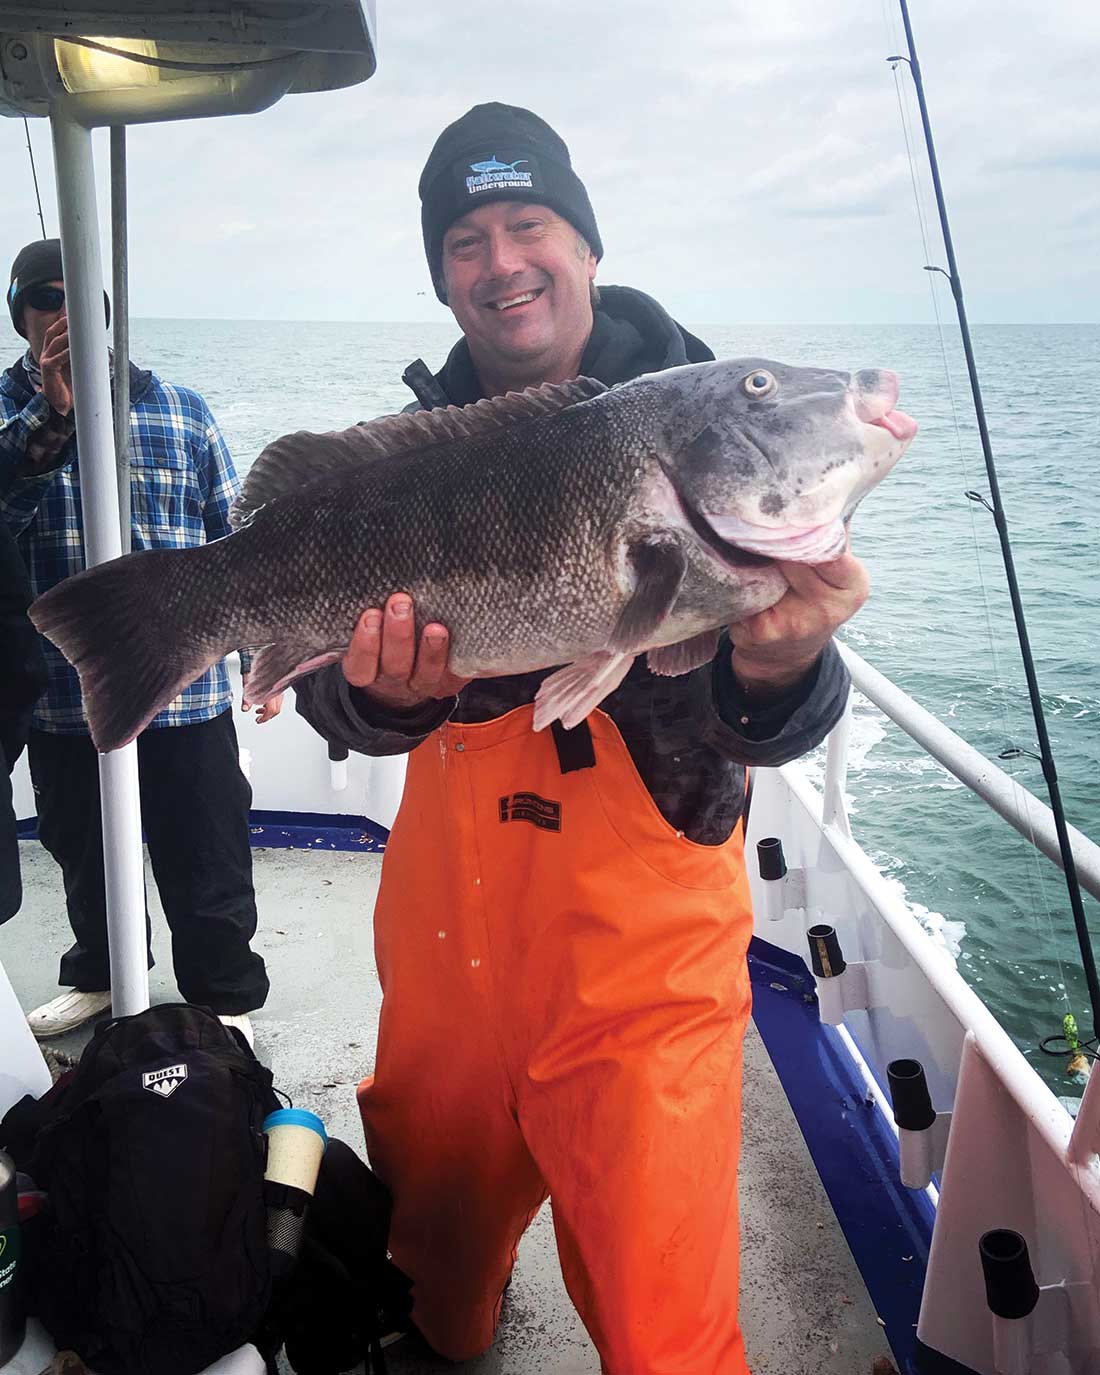 The author with a 10-1/4-pound tautog he hit on the Norma K III out of Point Pleasant in December while working on this article. This “DD” blackfish hit a 1-ounce MagicTails jig. 